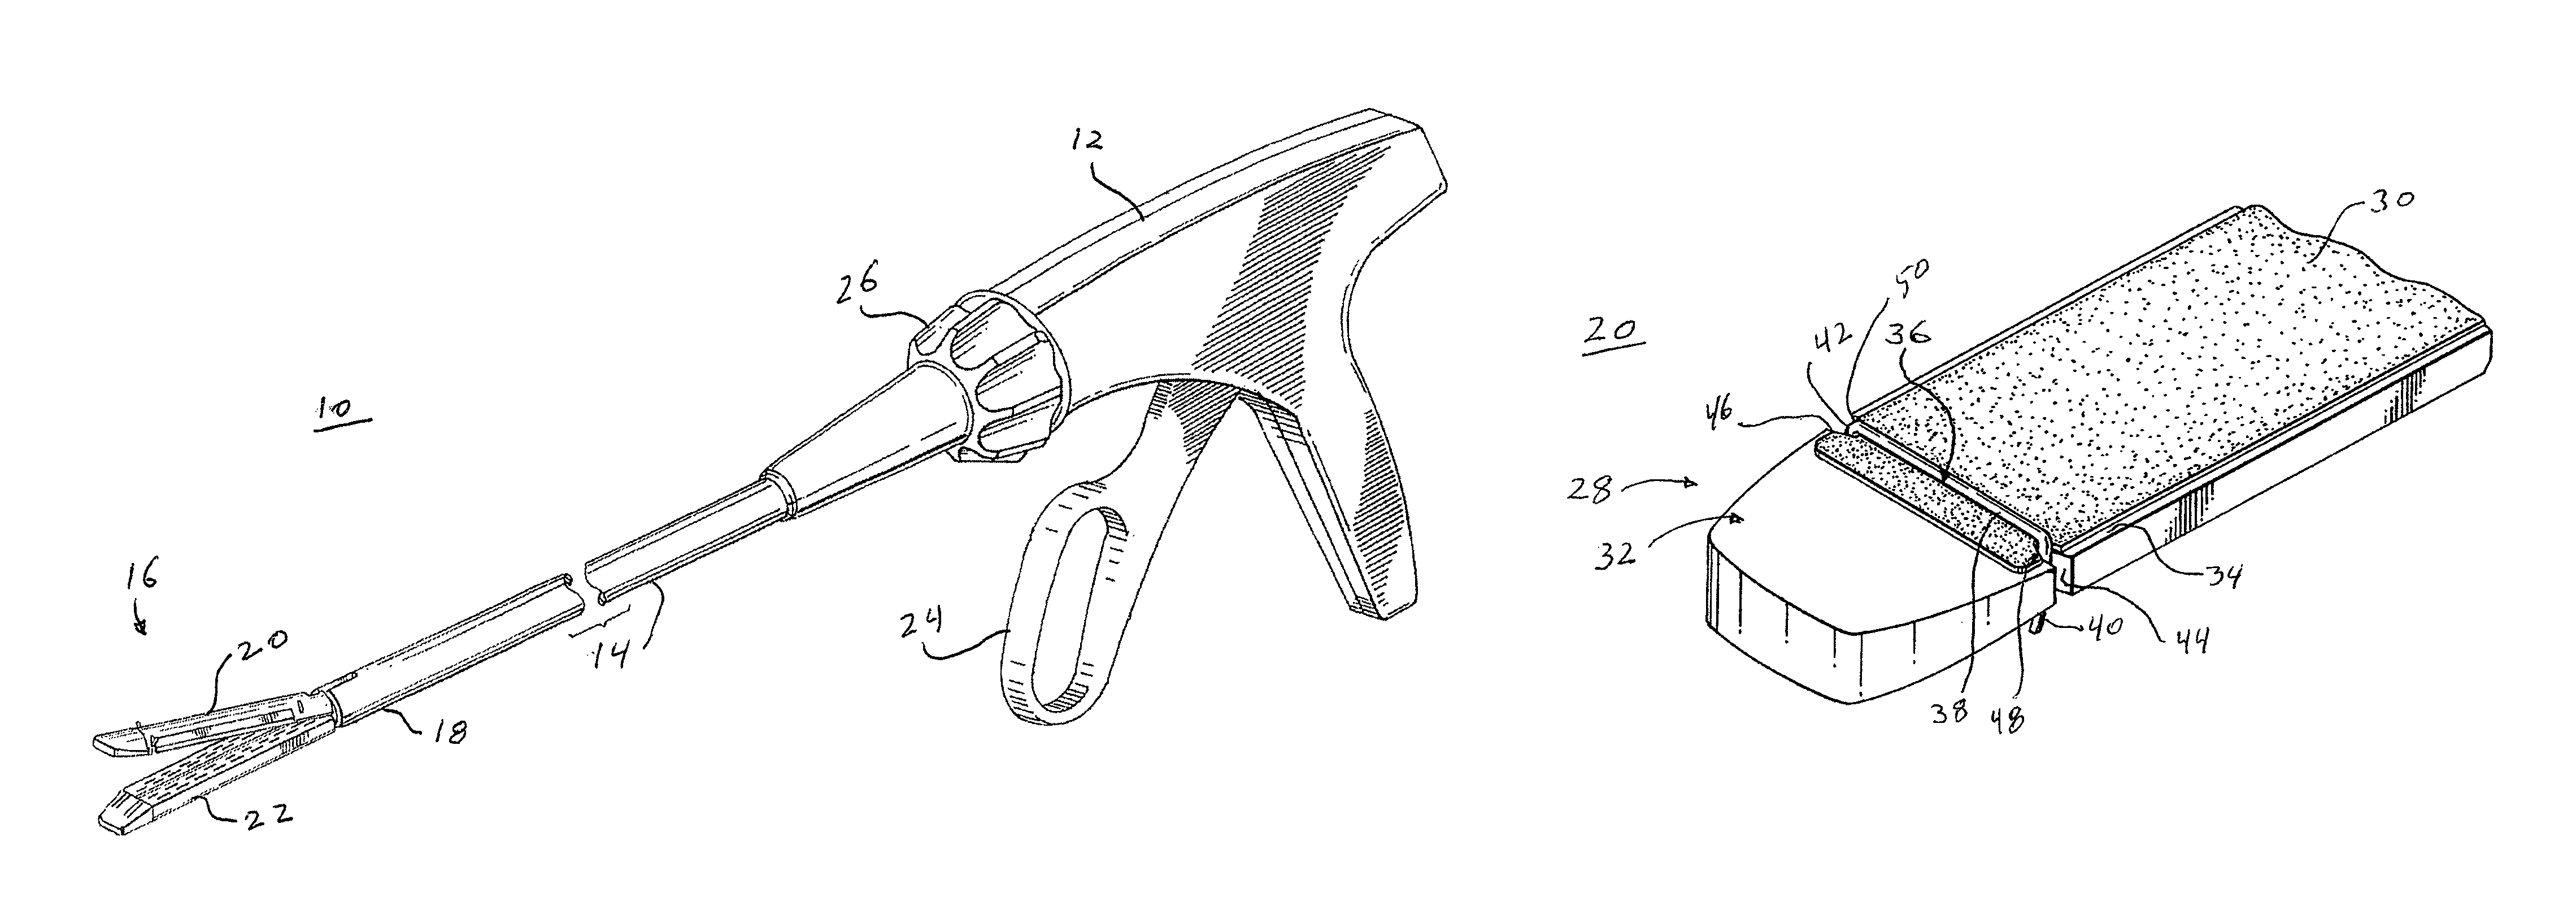 Crimp and release of suture holding buttress material